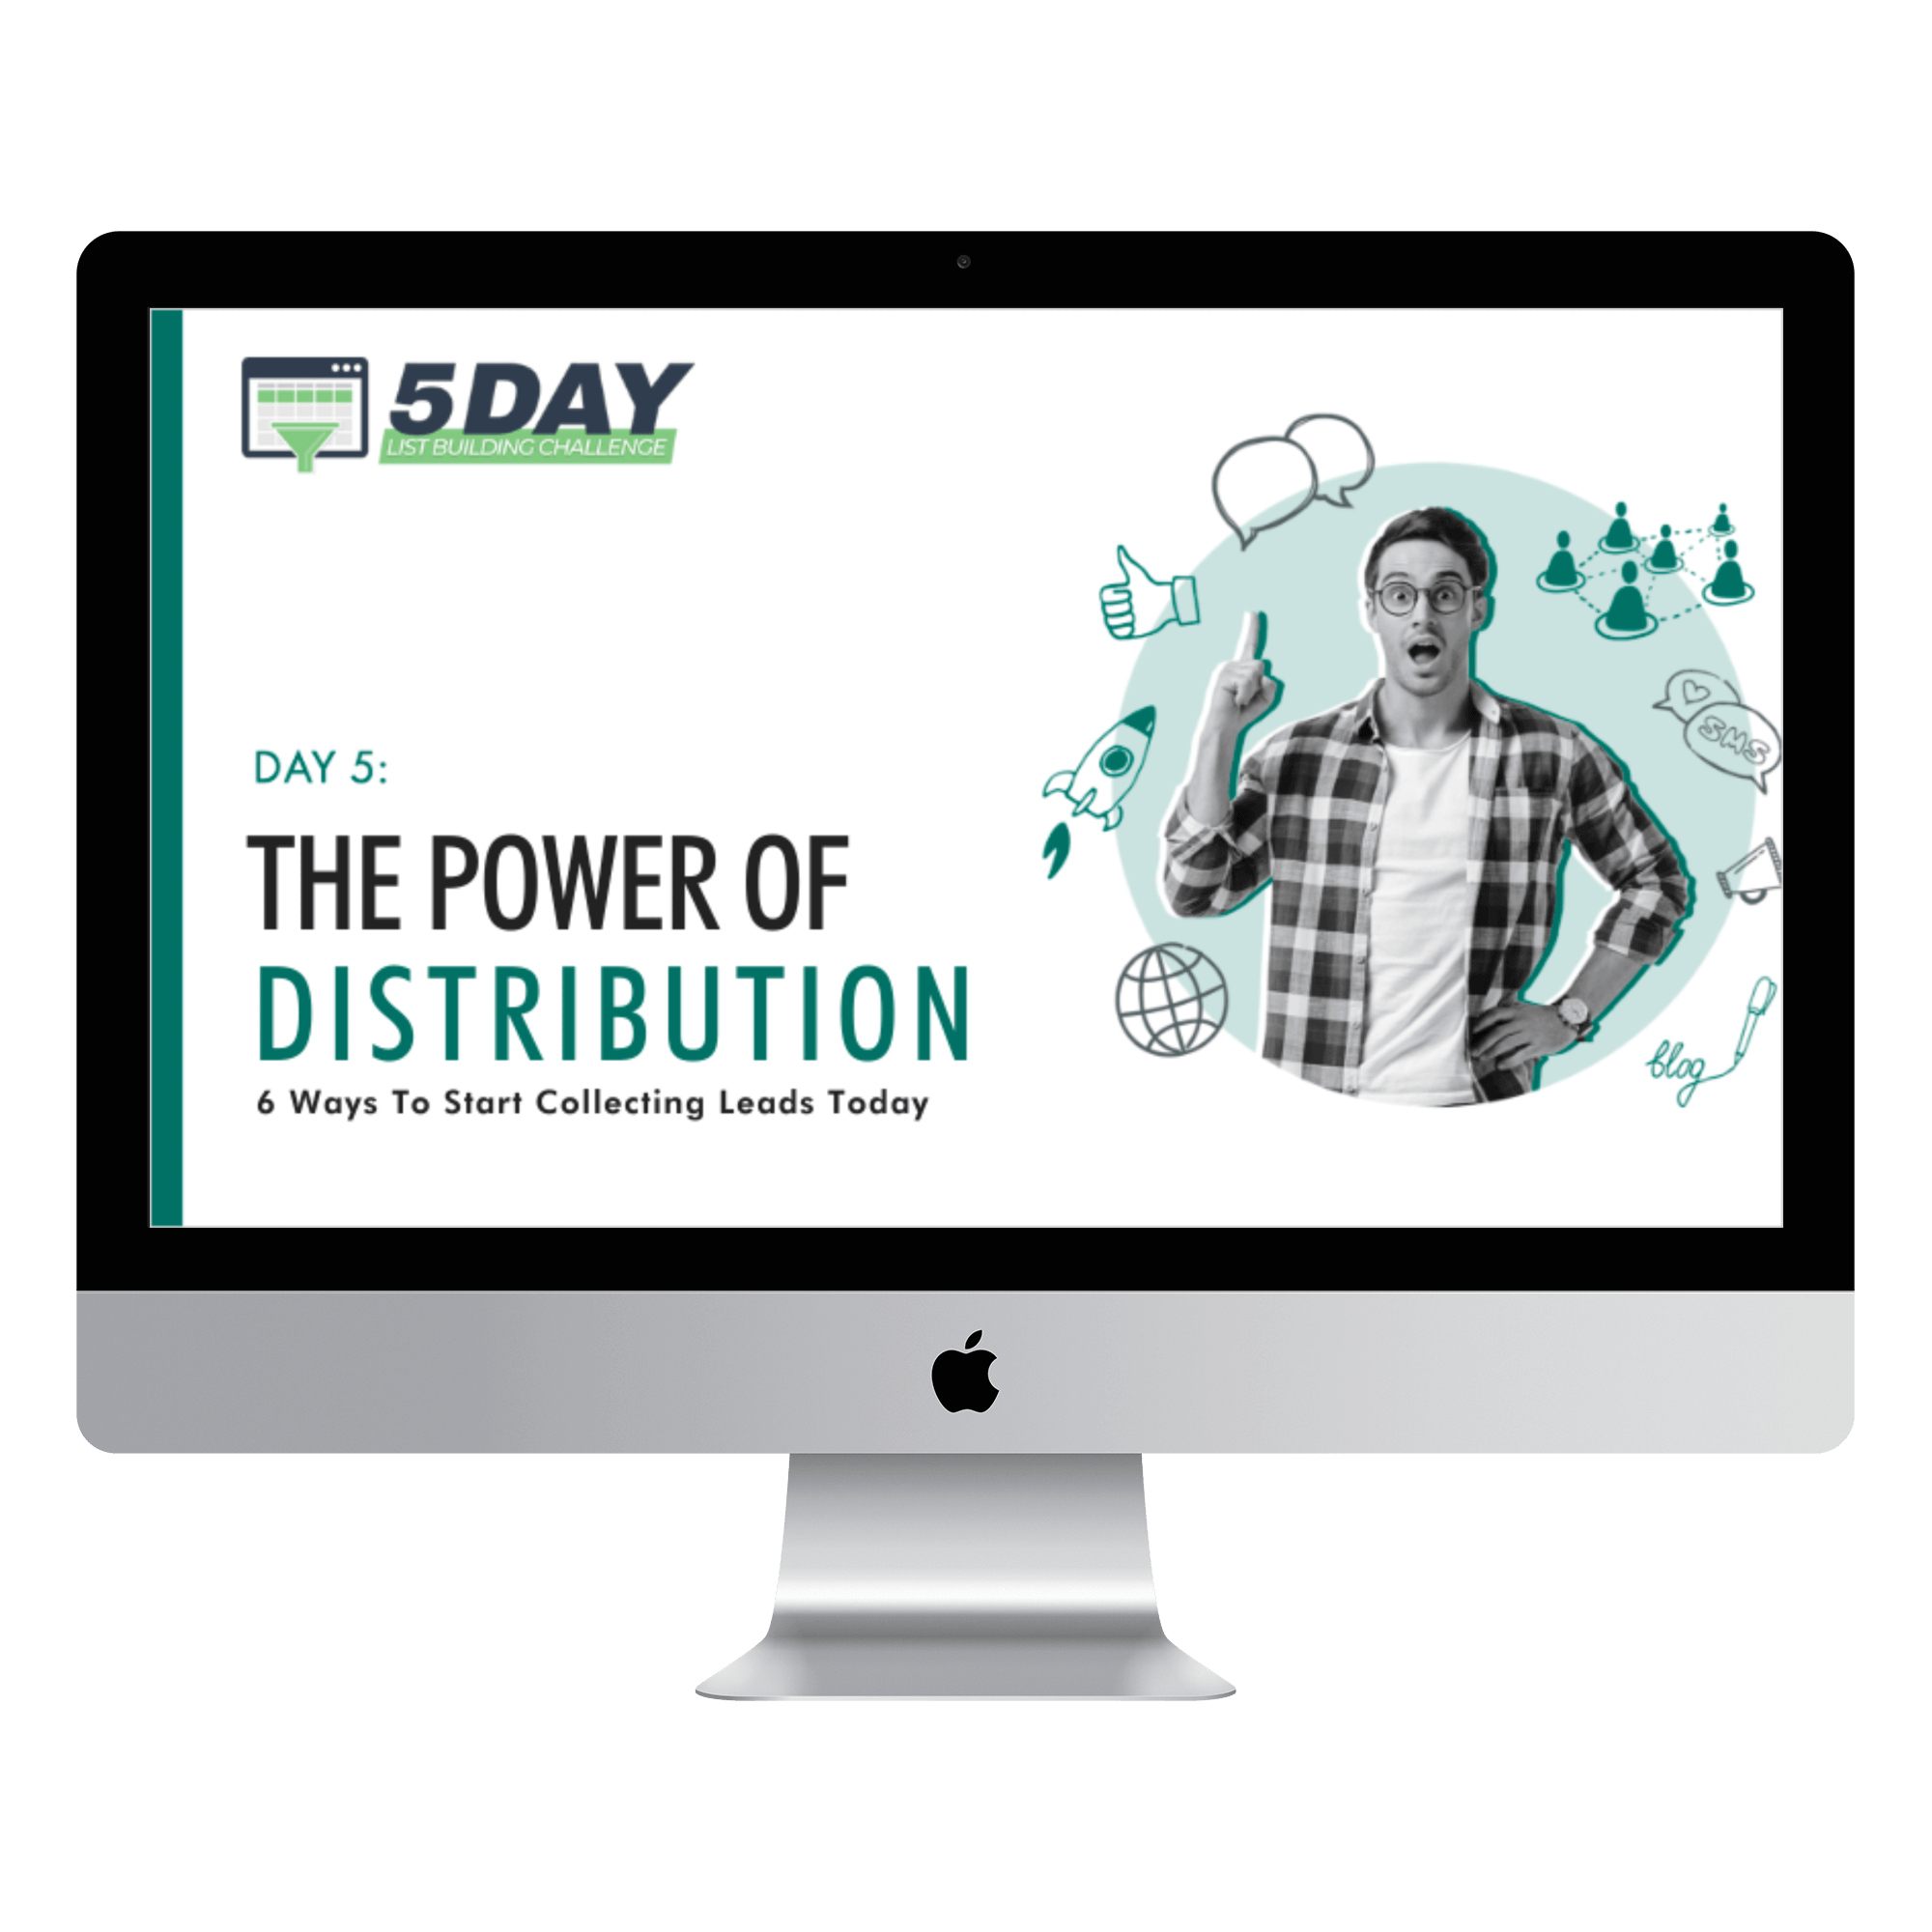 Day 5 - The Power Of Distribution